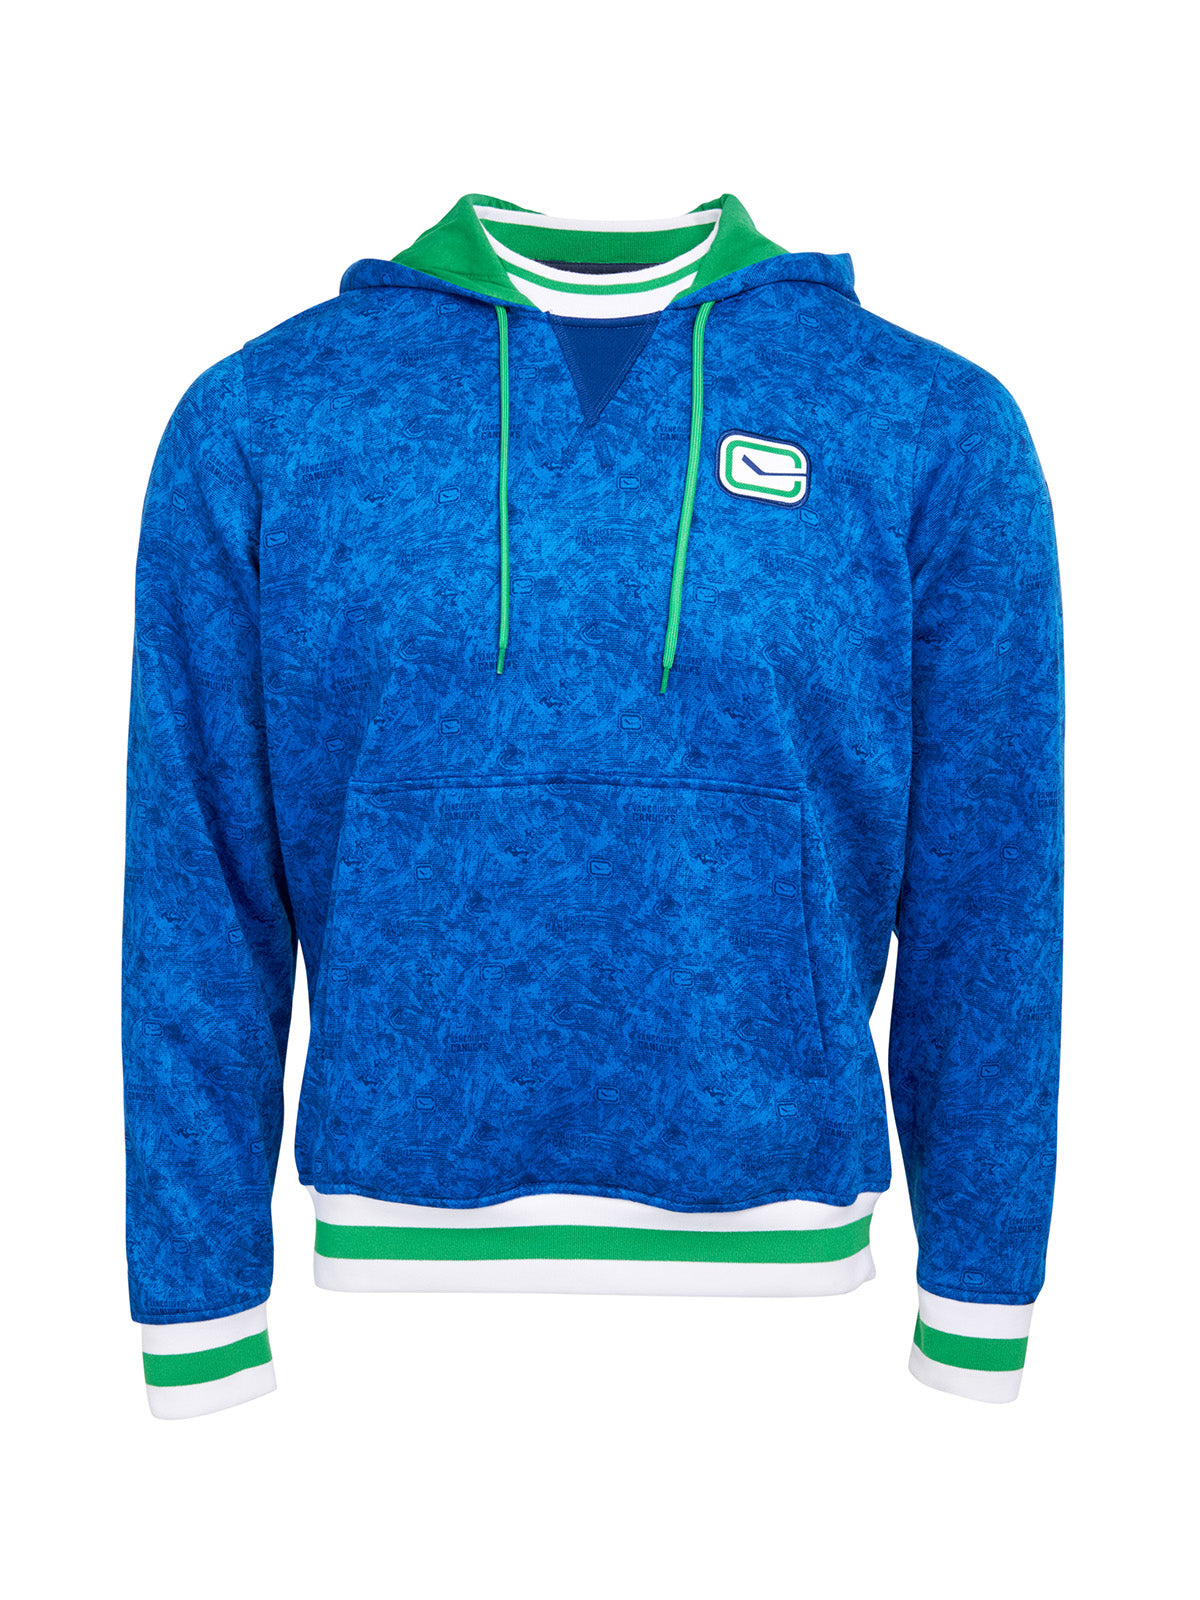 Vancouver Canucks Hoodie - Show your team spirit, with the iconic team logo patch on the front left chest, and proudly display your Vancouver Canucks support in their team colors with this NHL hockey hoodie.